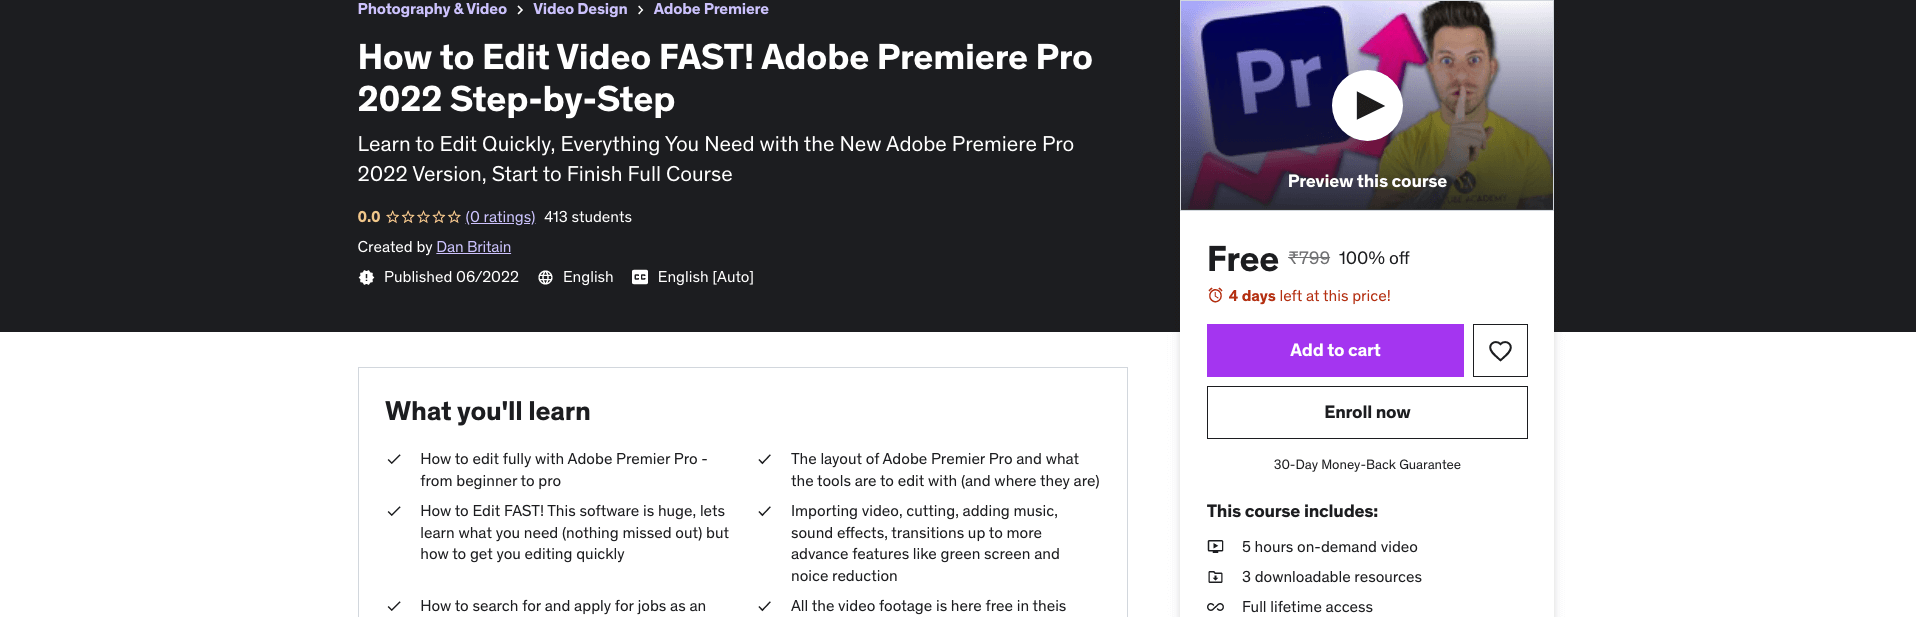 How to Edit Video FAST! Adobe Premiere Pro 2022 Step-by-Step